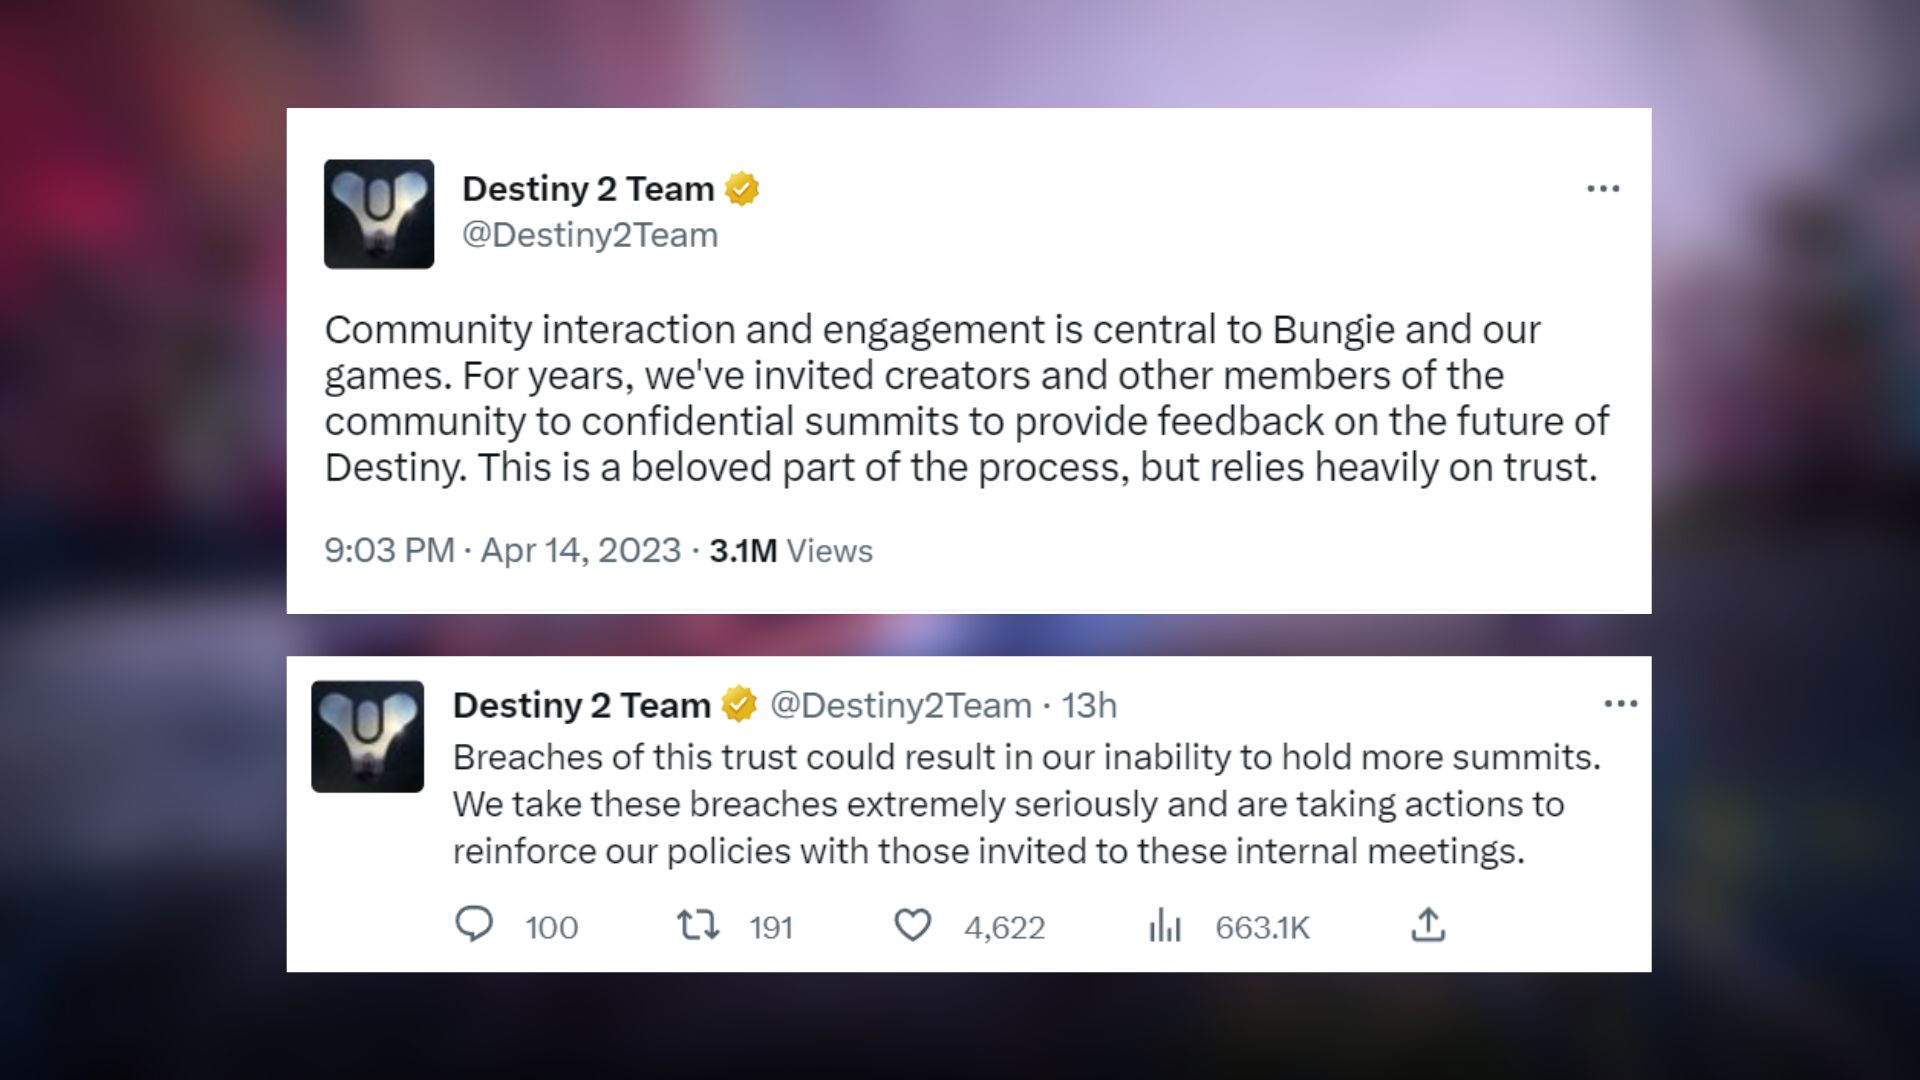 Bungie asks trust is “honoured” as Destiny 2 leaks harm all involved